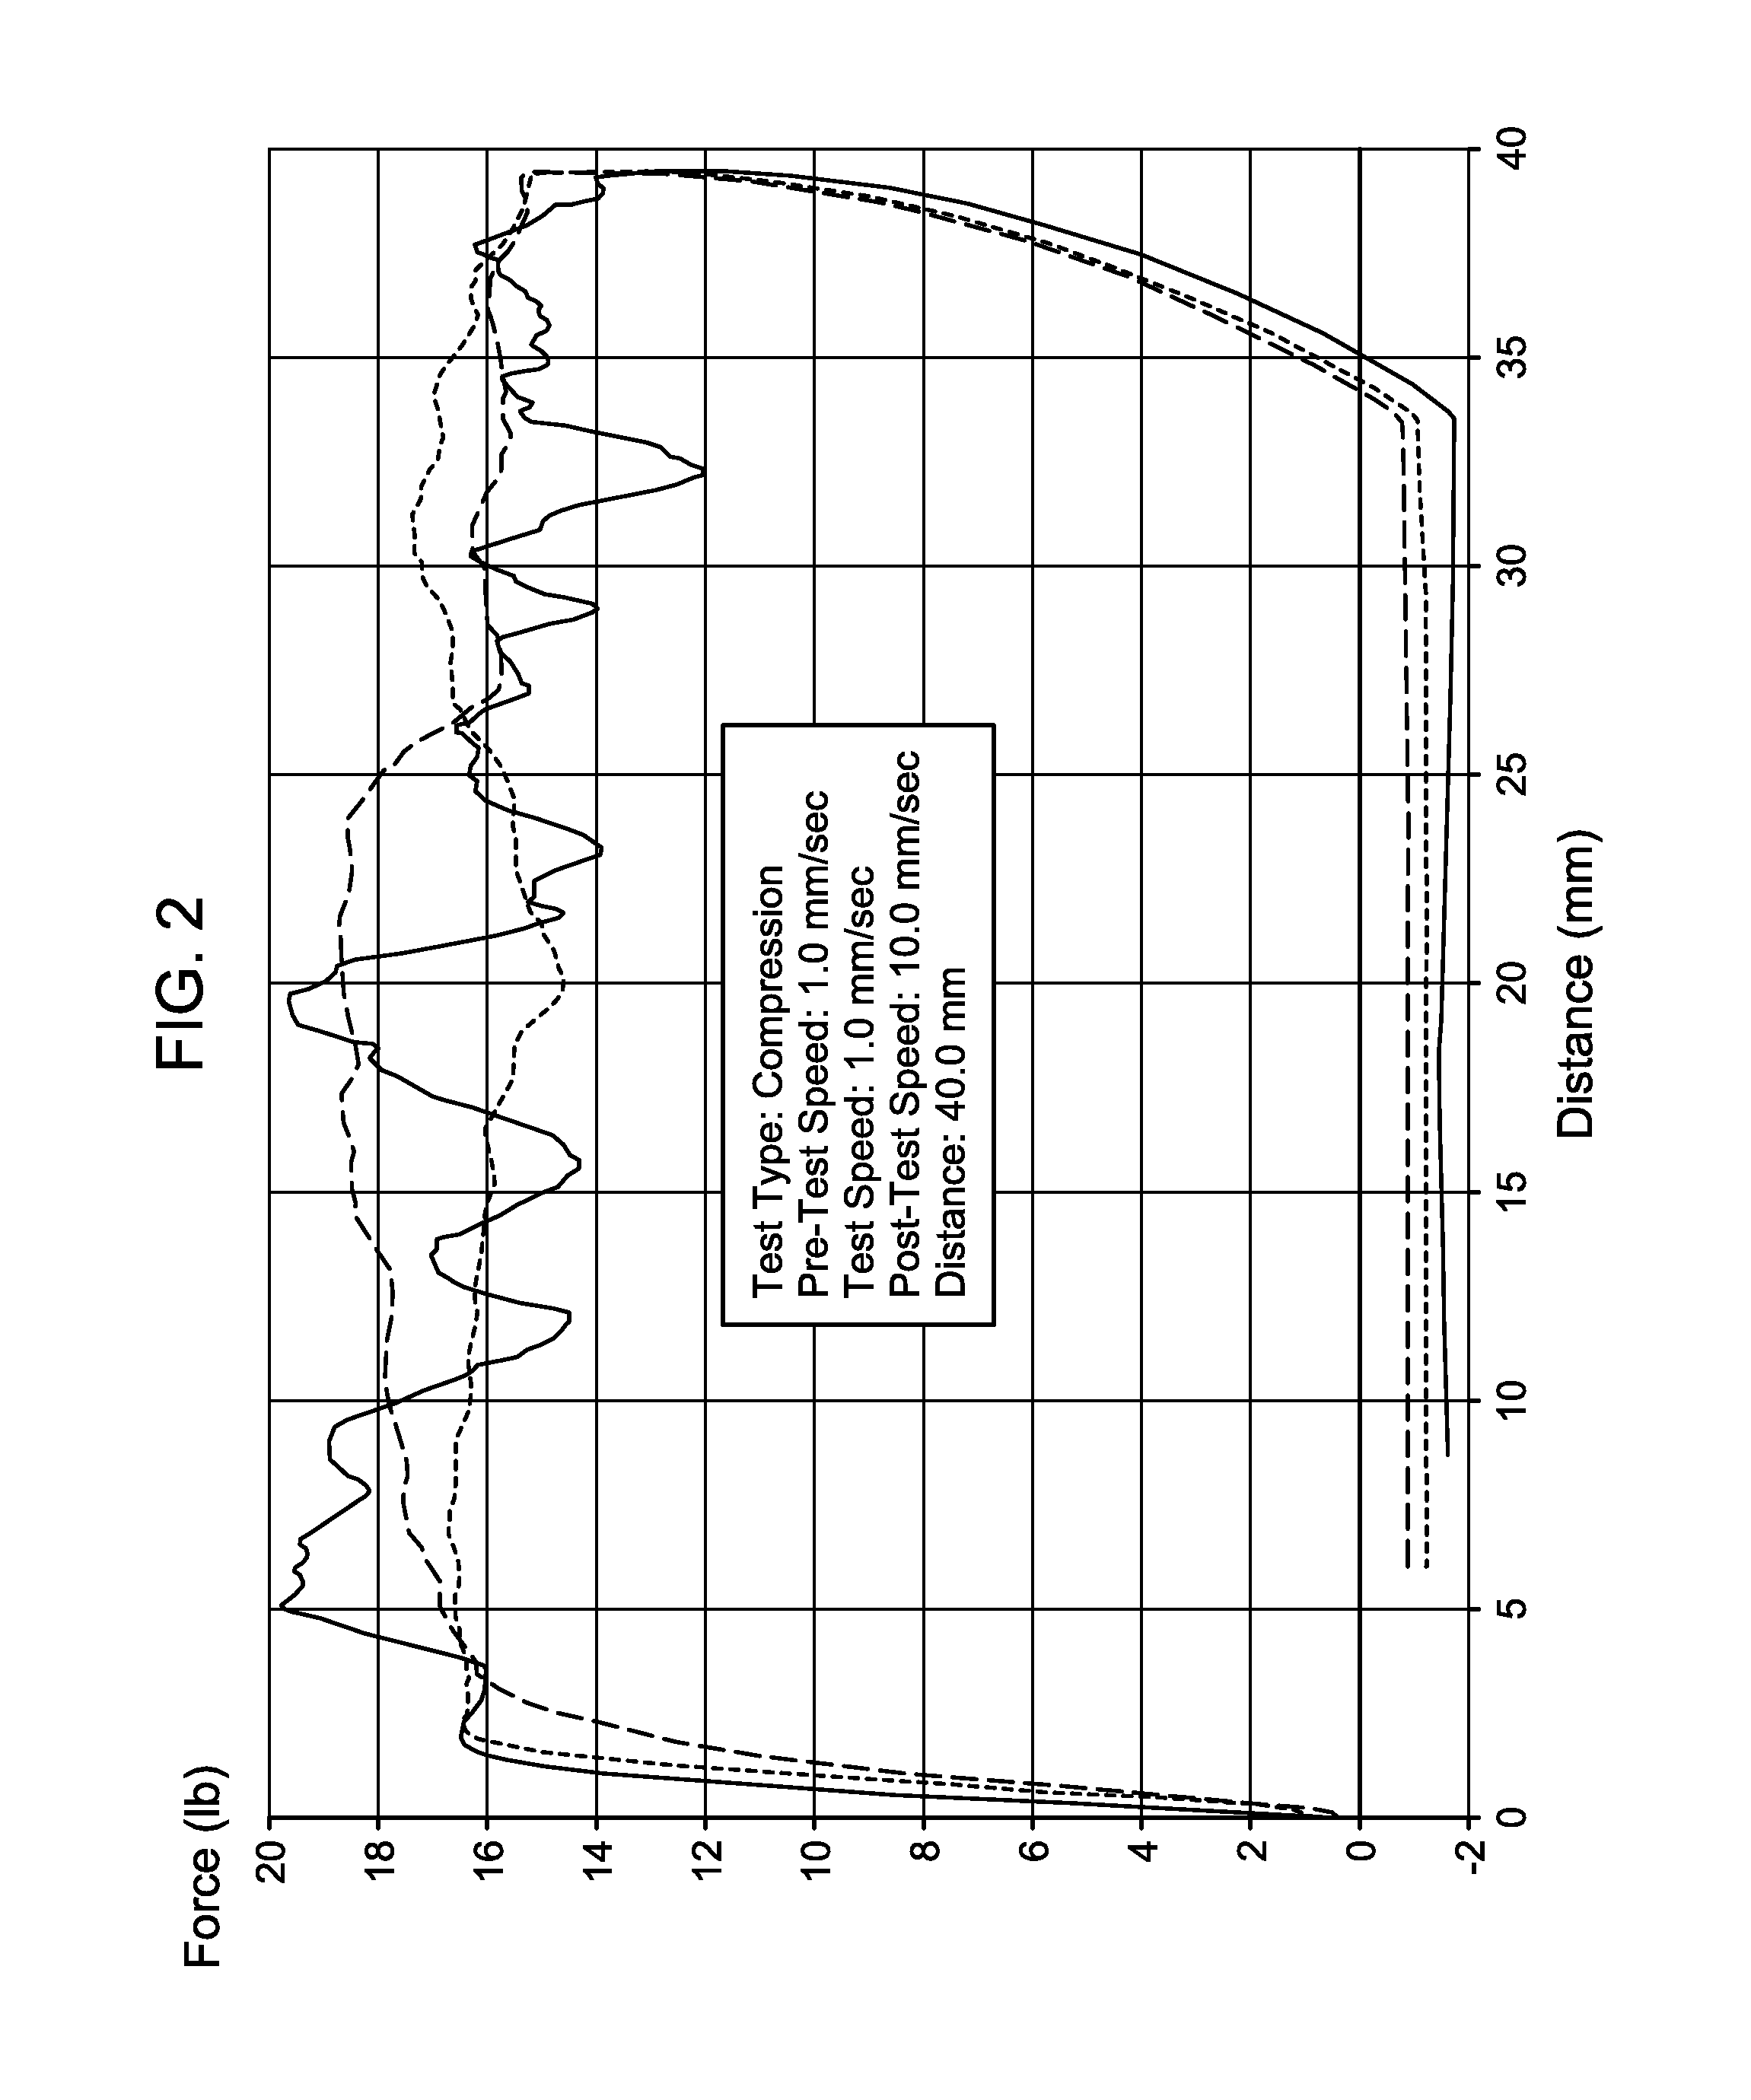 Method of Conversion of a Drilling Mud to a Gel-Based Lost Circulation Material to Combat Lost Circulation During Continuous Drilling